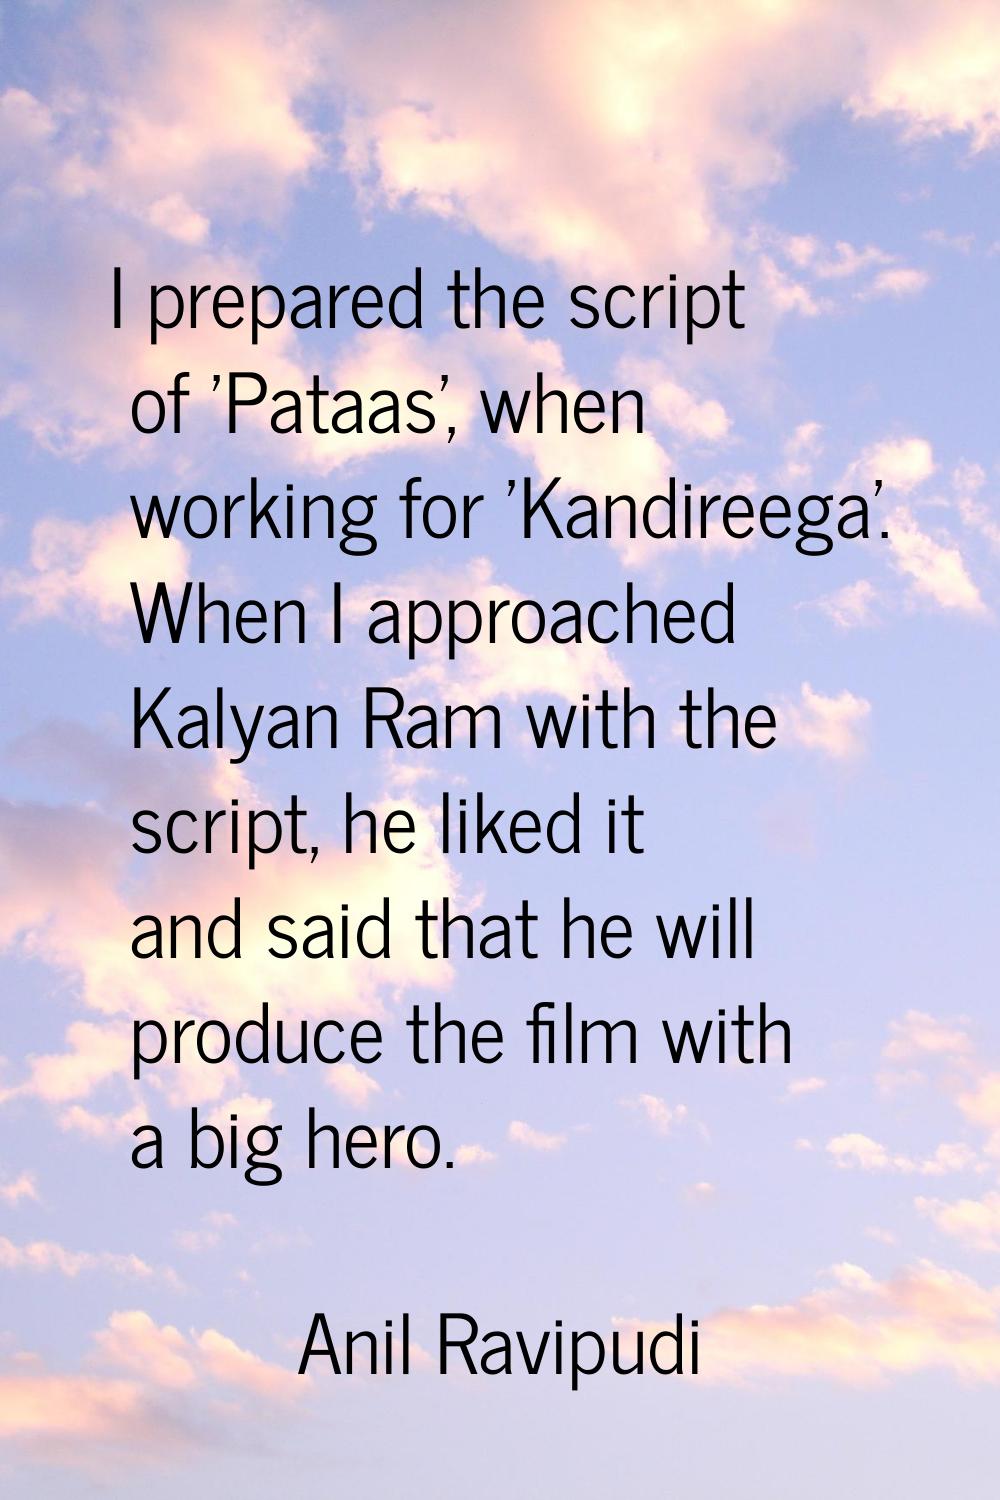 I prepared the script of 'Pataas', when working for 'Kandireega'. When I approached Kalyan Ram with